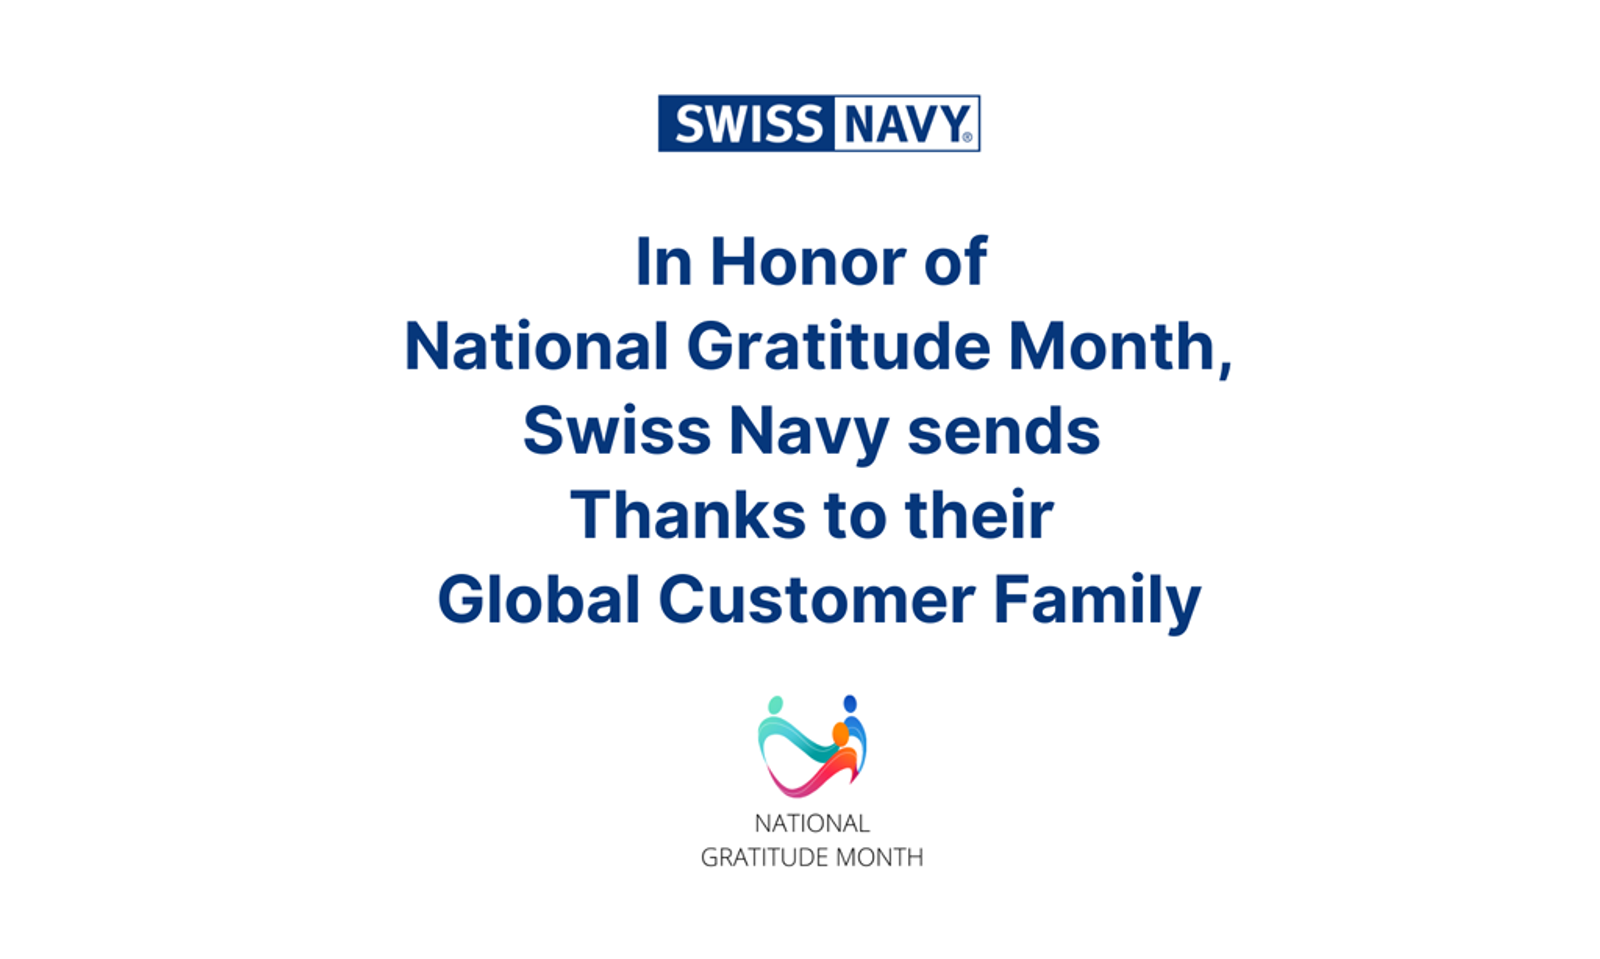 Swiss Navy Thanks Customers to Celebrate National Gratitude Month